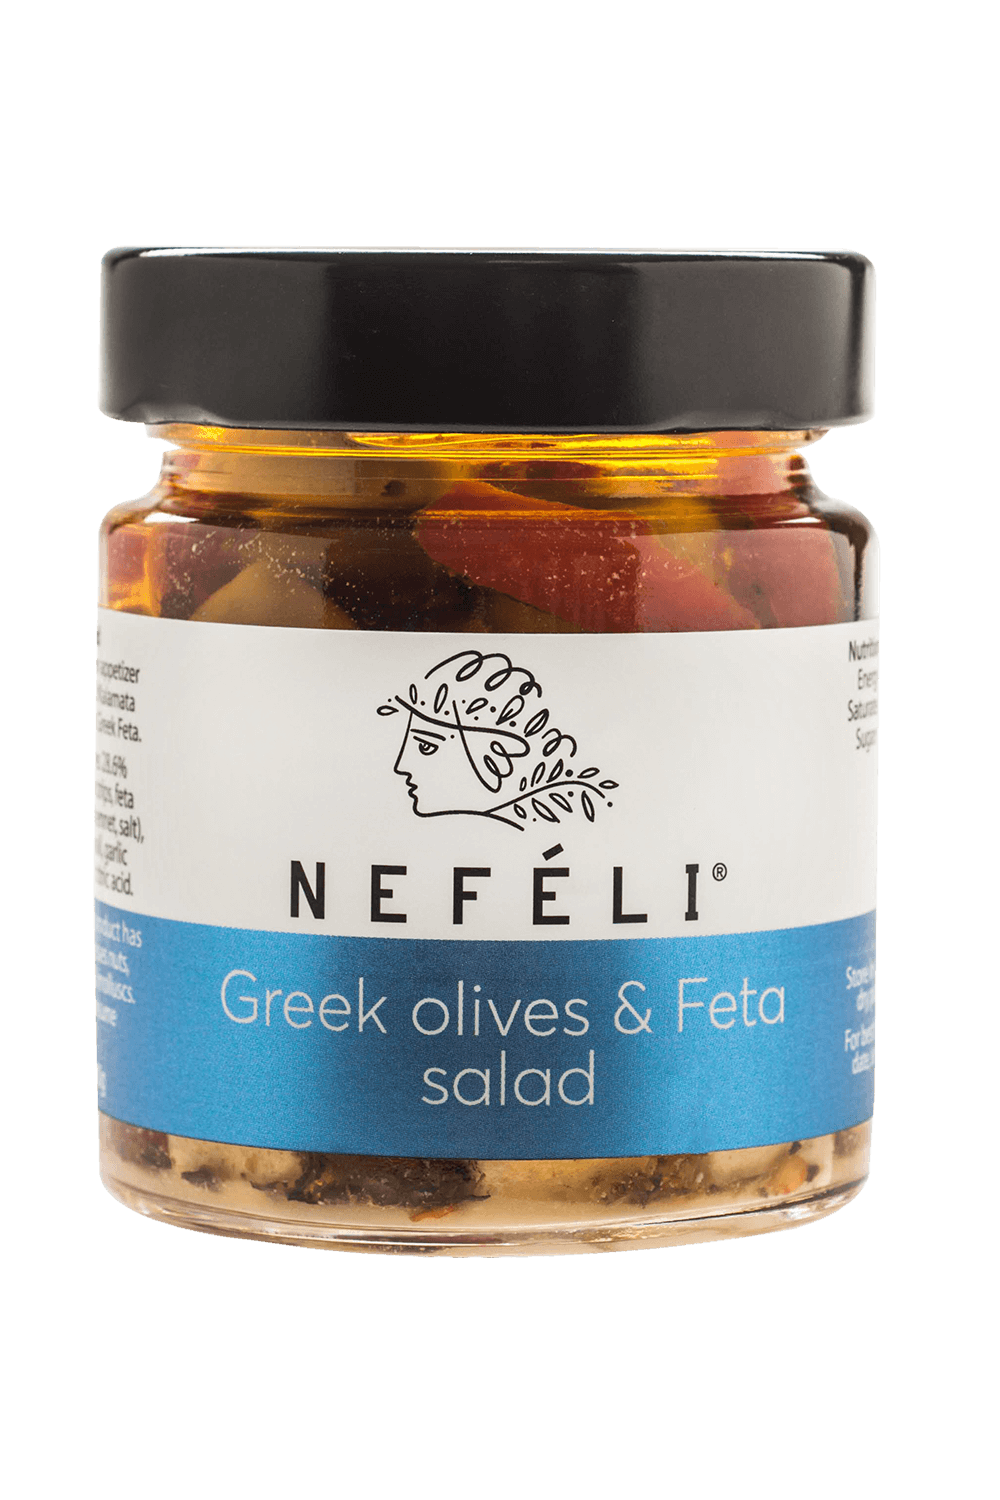 Kalamata and Halkidiki olives with authentic PDO Greek Feta in a herb marinade